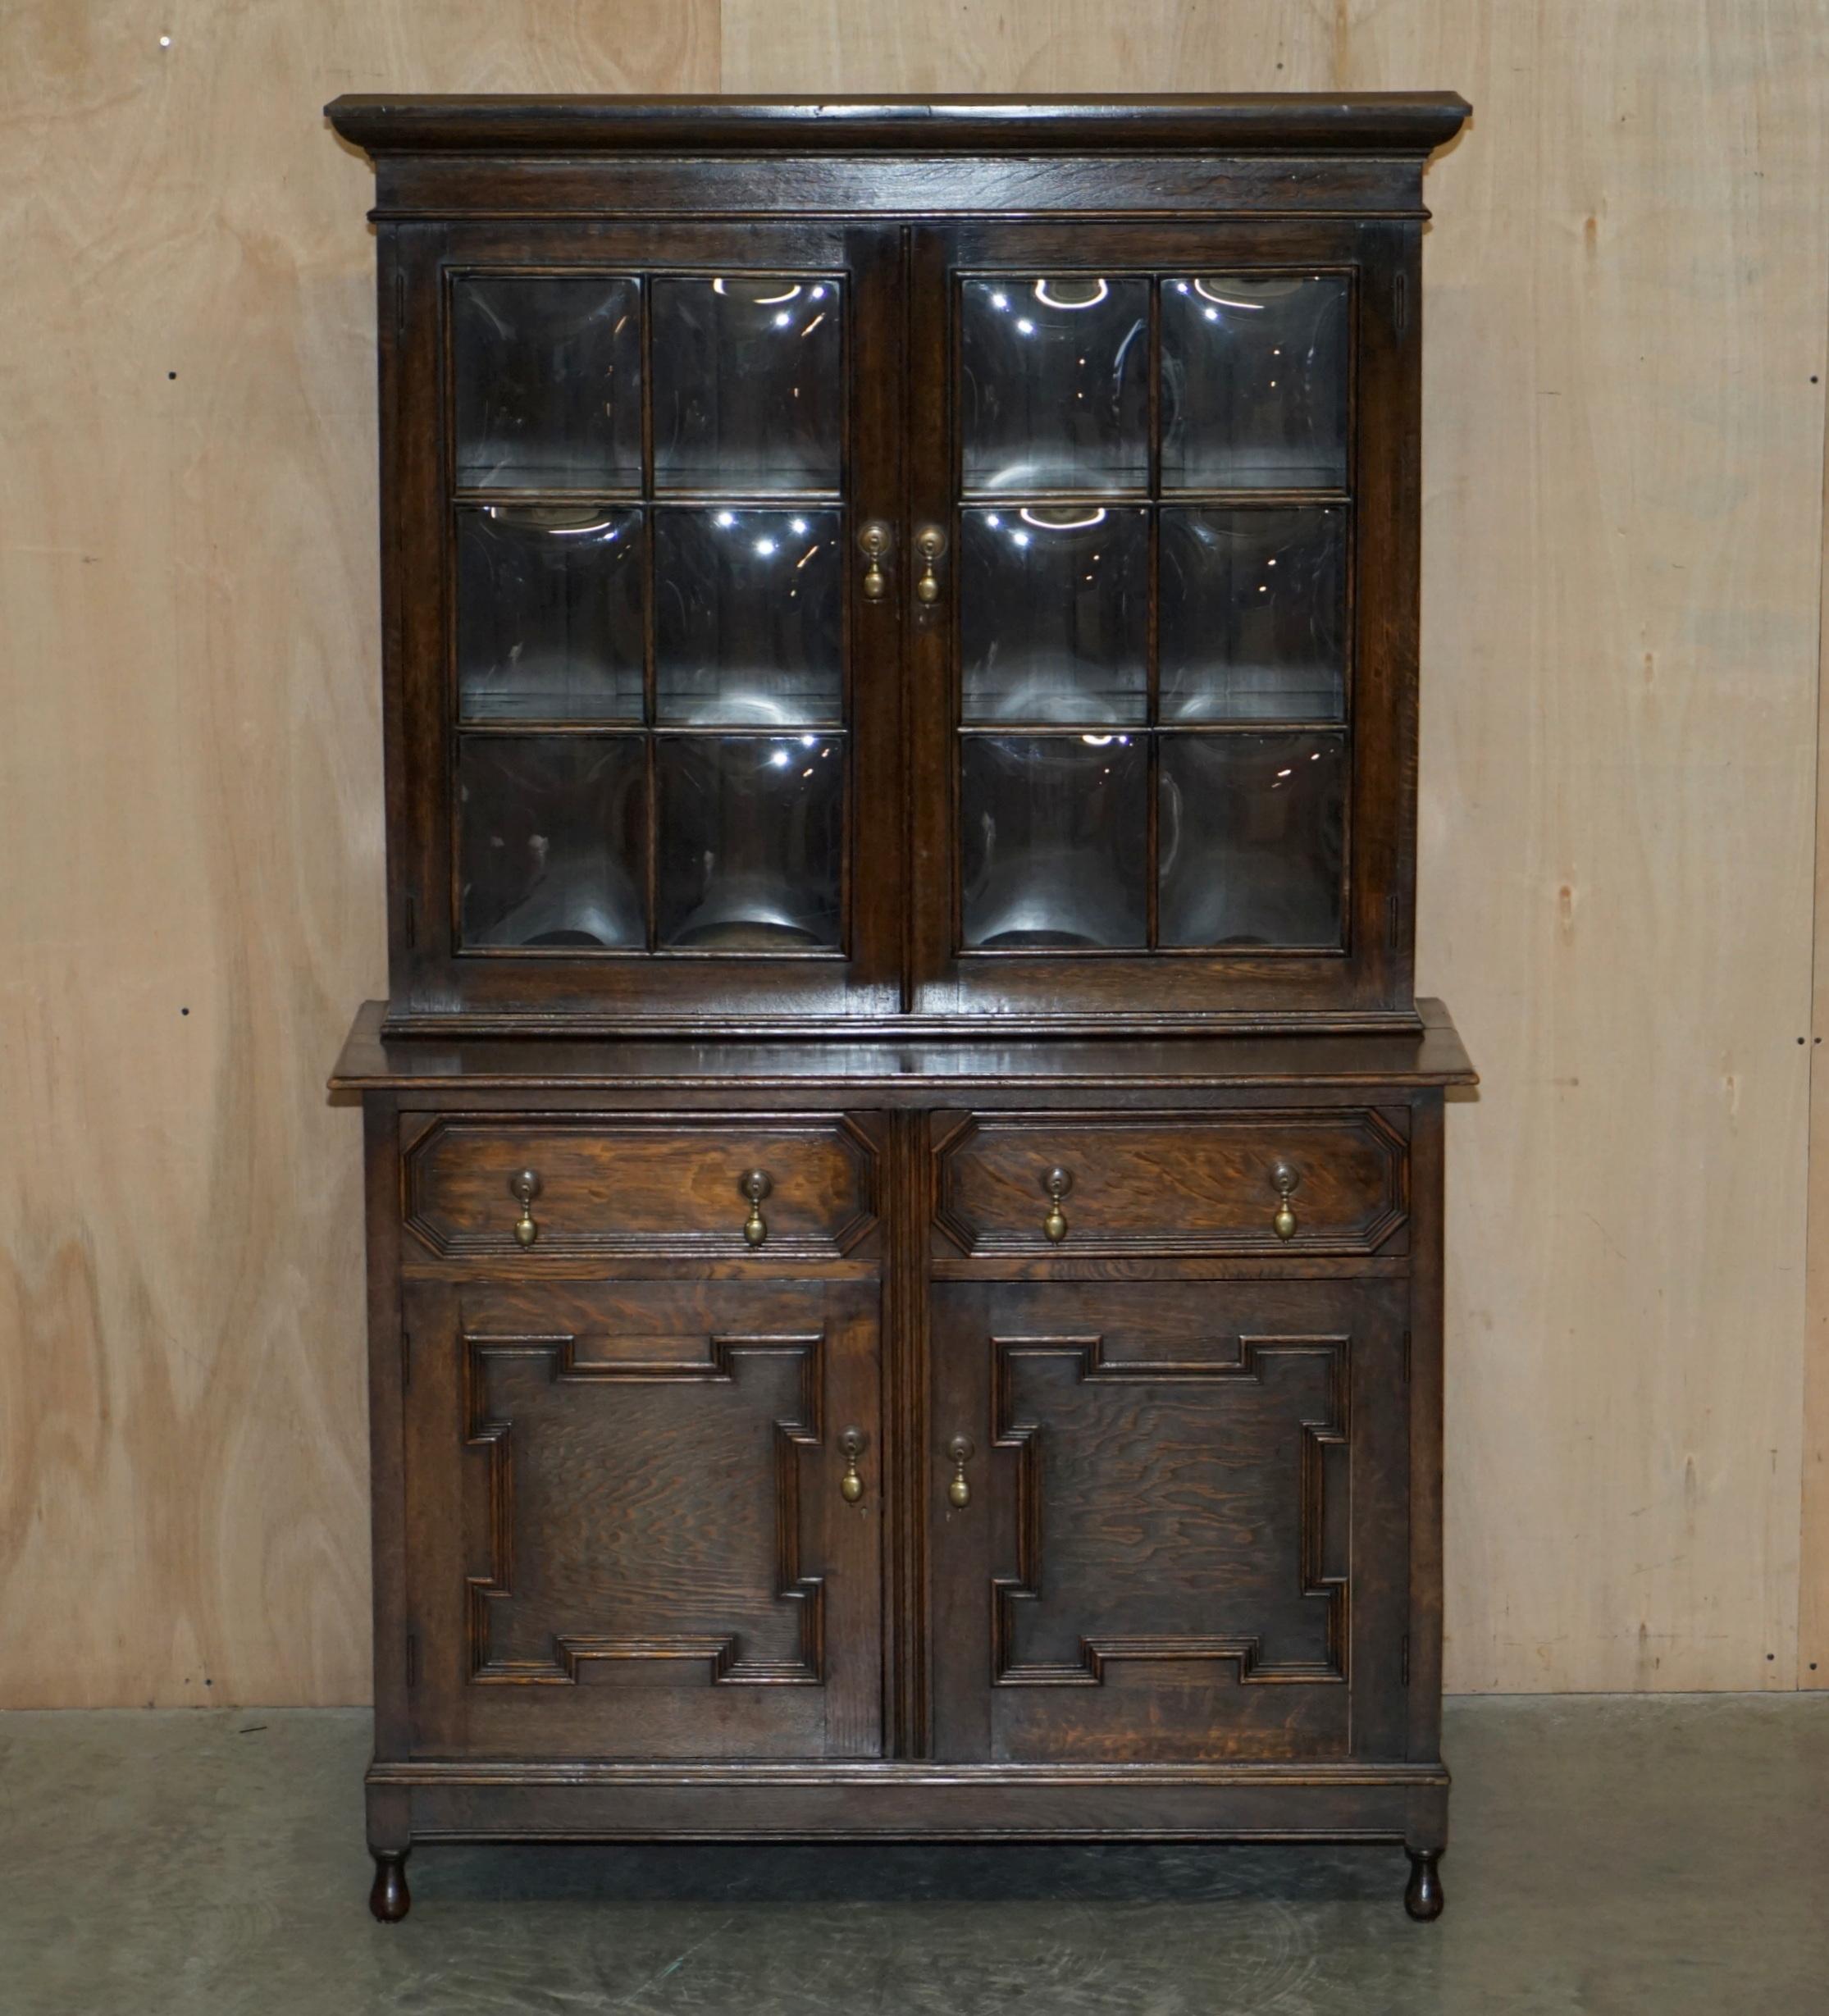 We are delighted to offer for sale this sublime circa 1900 hand carved Jacobean Revival oak library bookcases with beautifully curved glass panes 

A very good looking well made and decorative library bookcase or dresser with stunning bowed glass